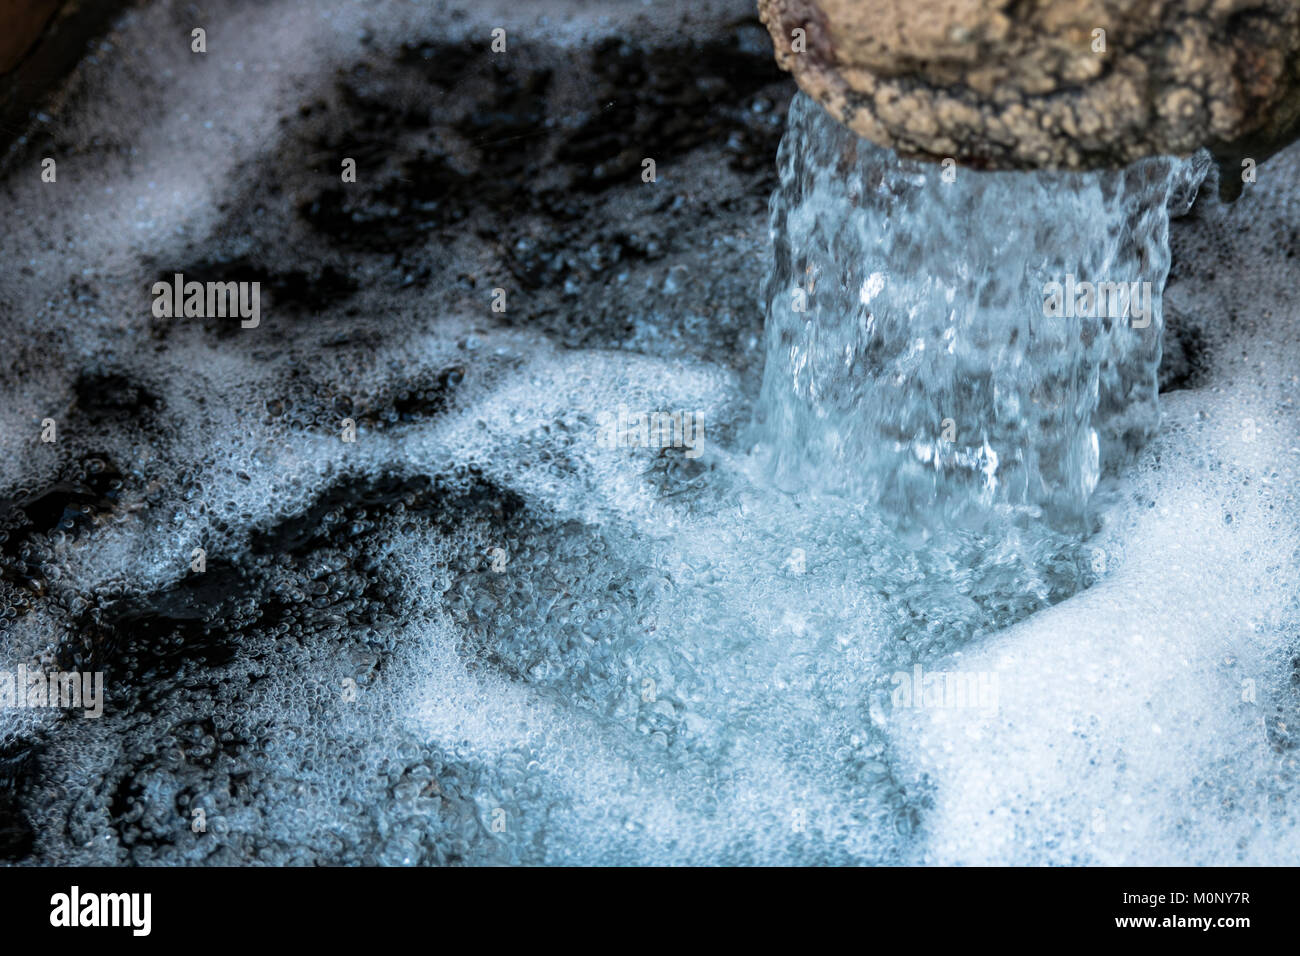 CLose-up on a water fountain, showing clear, cristaline, sweet, drinking water. Stock Photo